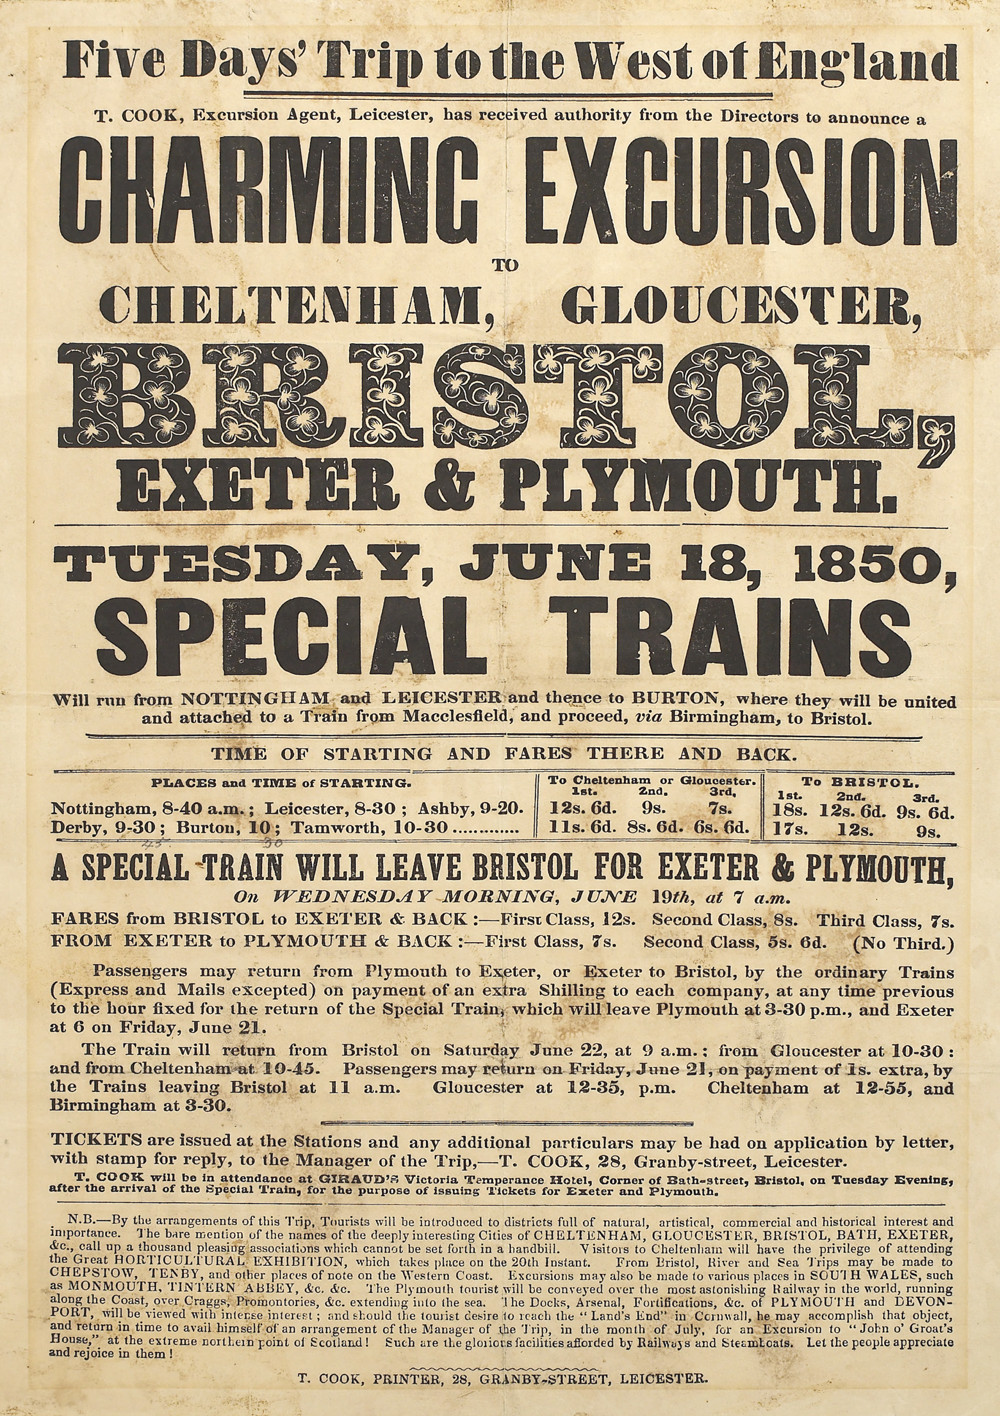 *Poster for a Thomas Cook excursion to the West of England, 1850. Courtesy of Thomas Cook Archives*